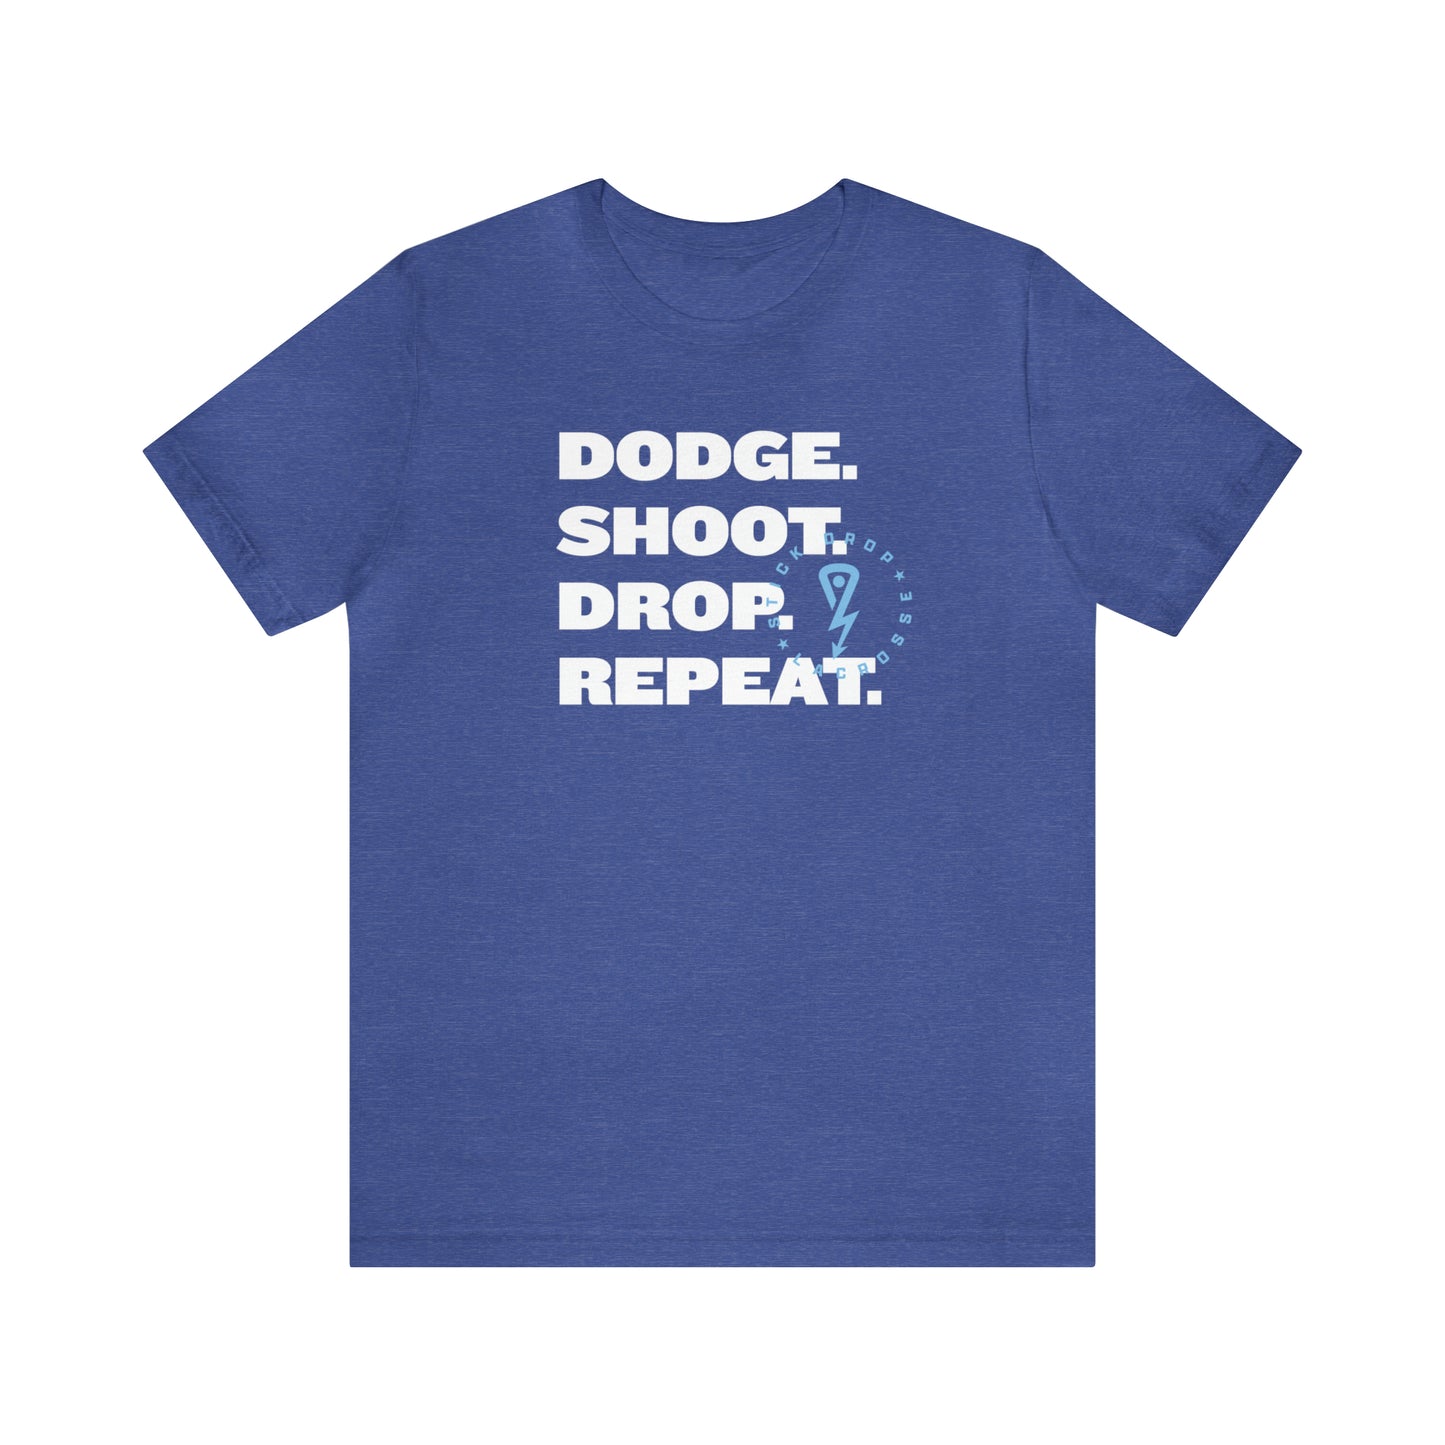 Heather Blue Dodge. Shoot. Drop. Repeat. T-shirt with white lettering and light blue logo